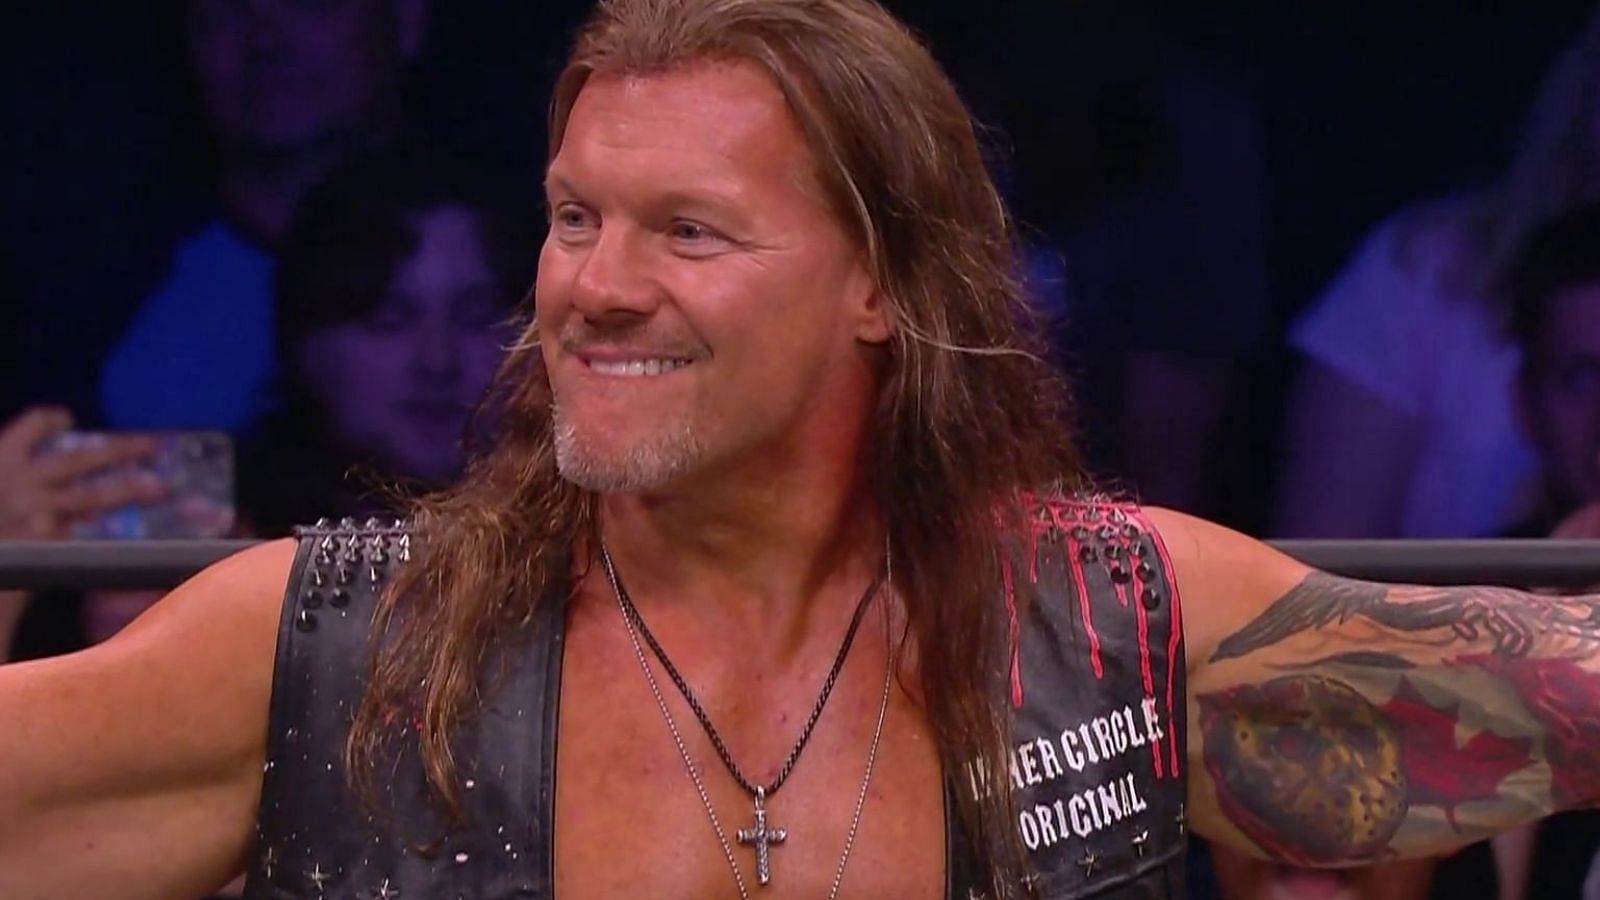 Chris Jericho has formed another stable by the name of Jericho Appreciation Society.